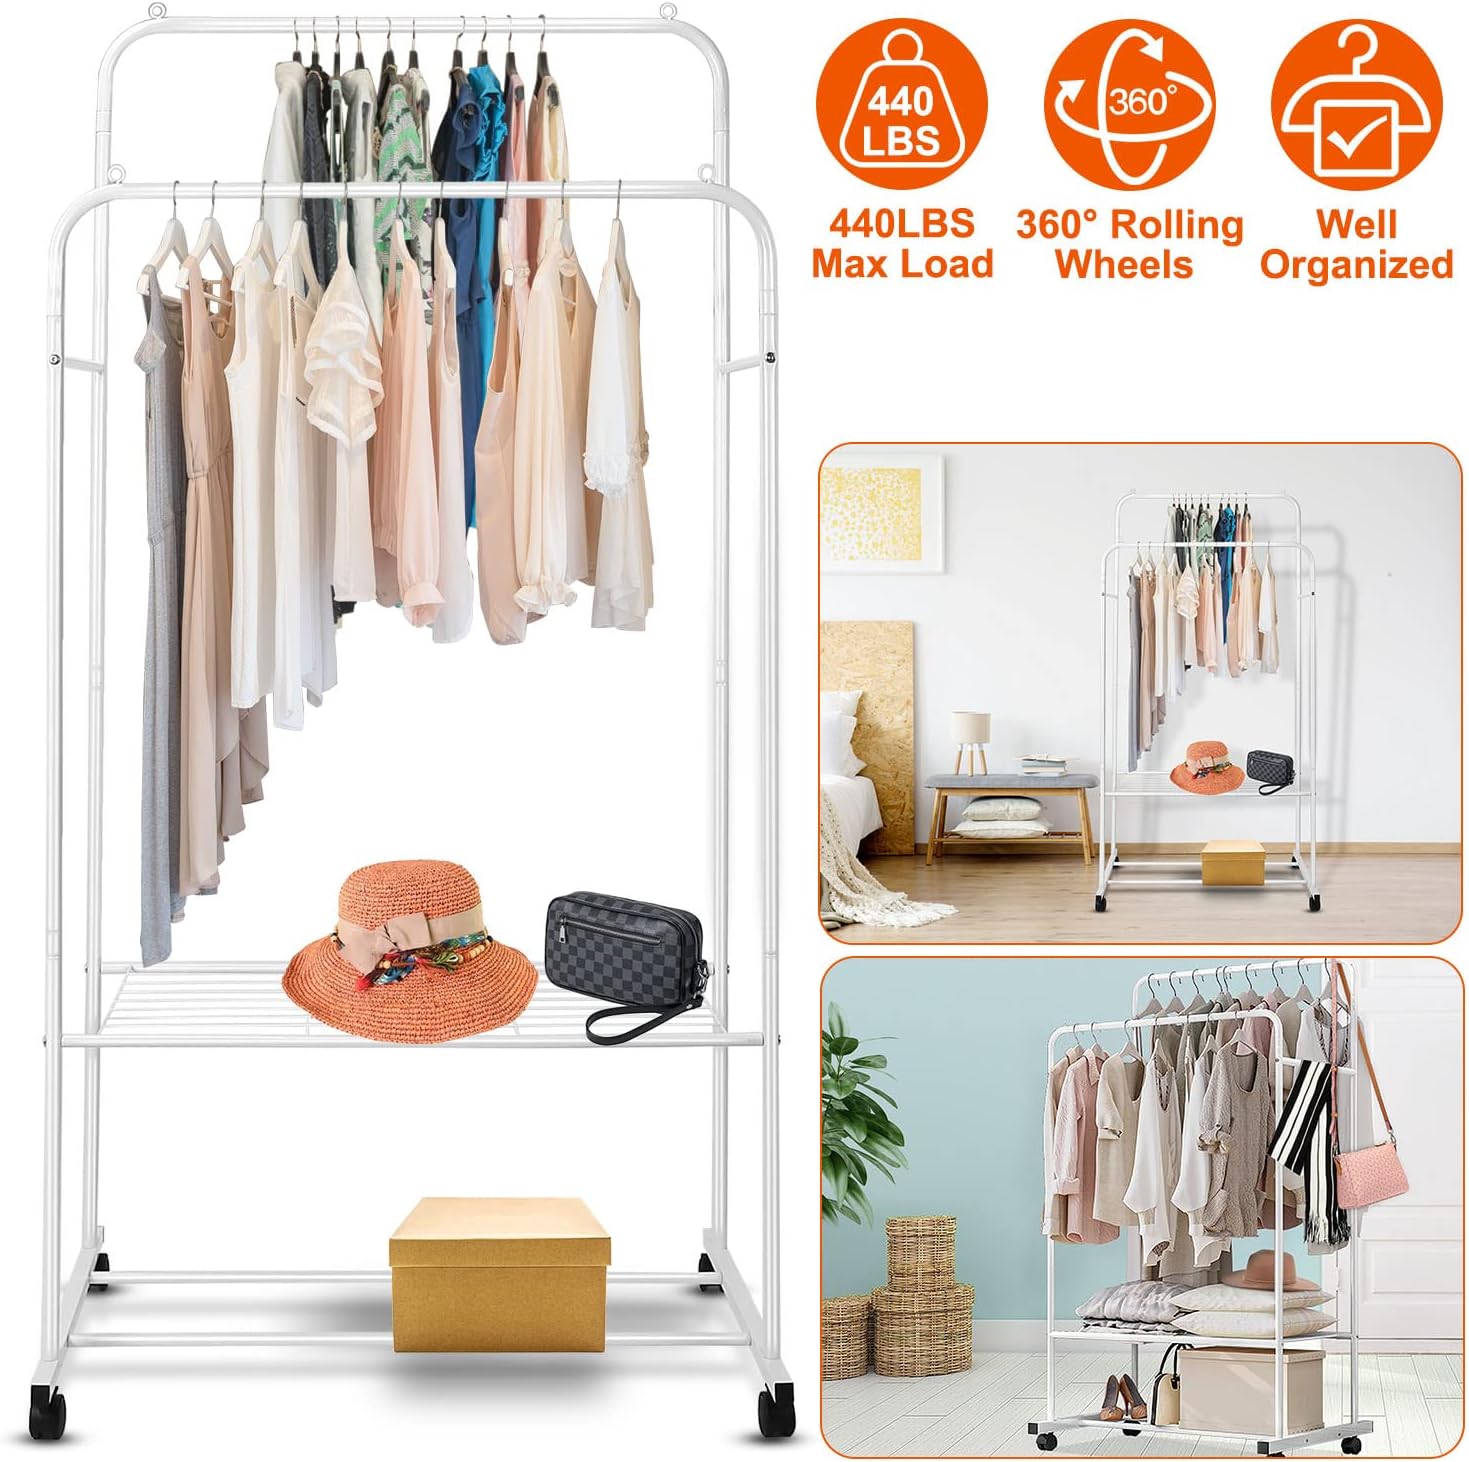 Garment Rack,42'' Freestanding Clothes Rack Shoe Clothing Organizer Shelves,Multifunctional Clothes Wardrobe with 4 Hooks & 2 Hanging Rods,Coated Iron Frame,Easy Assembly,Max Load 350lbs